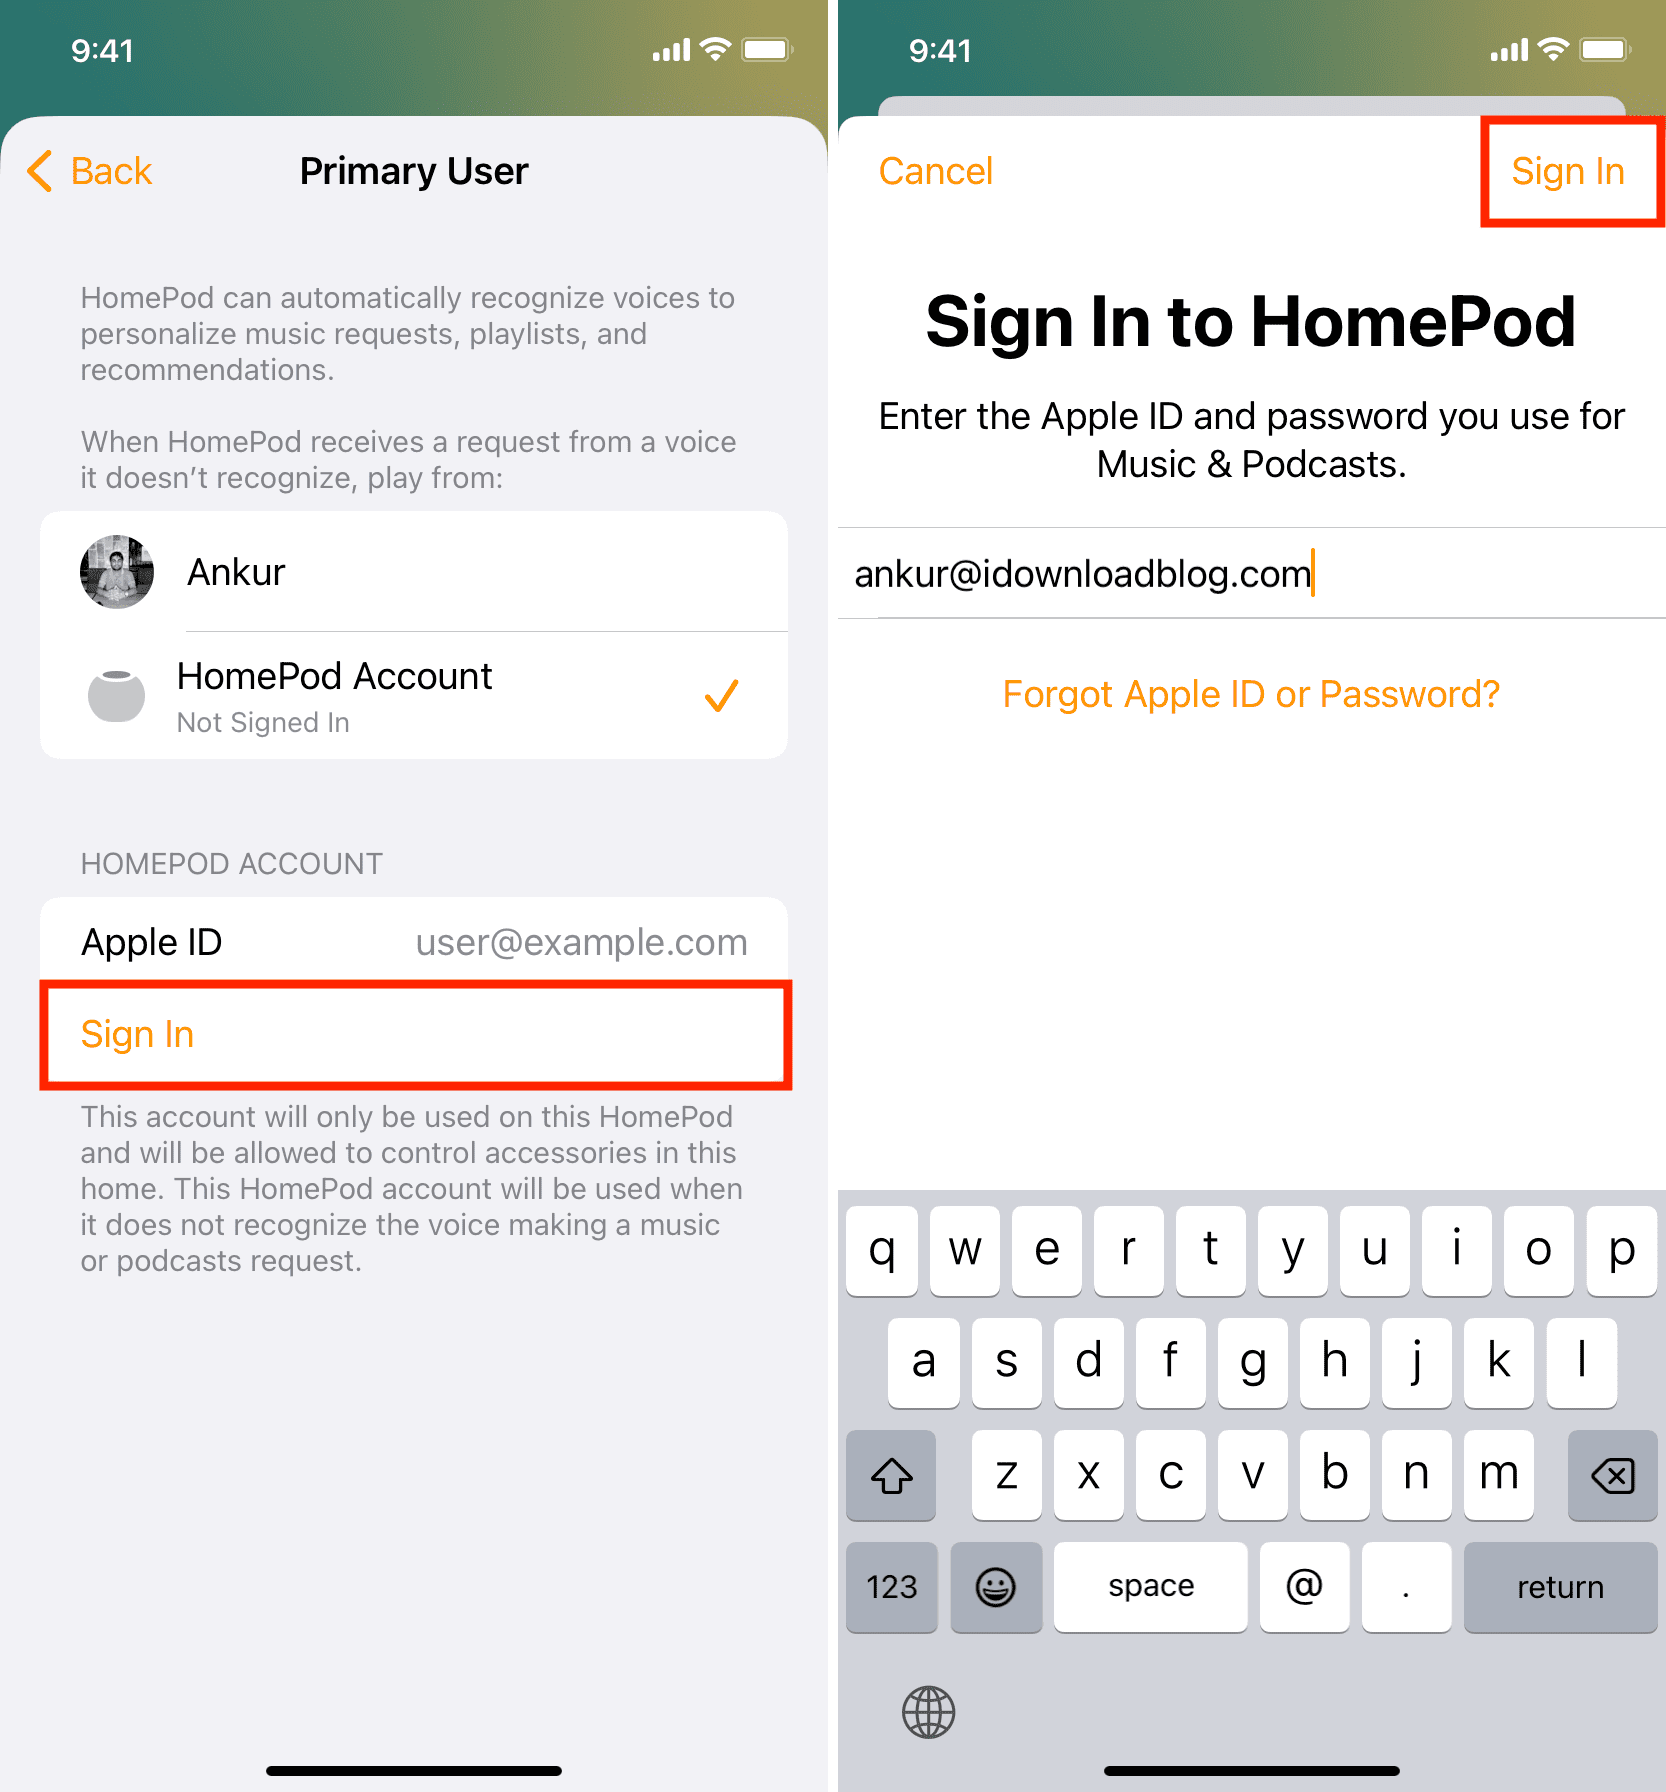 Sign In with another Apple ID on your HomePod